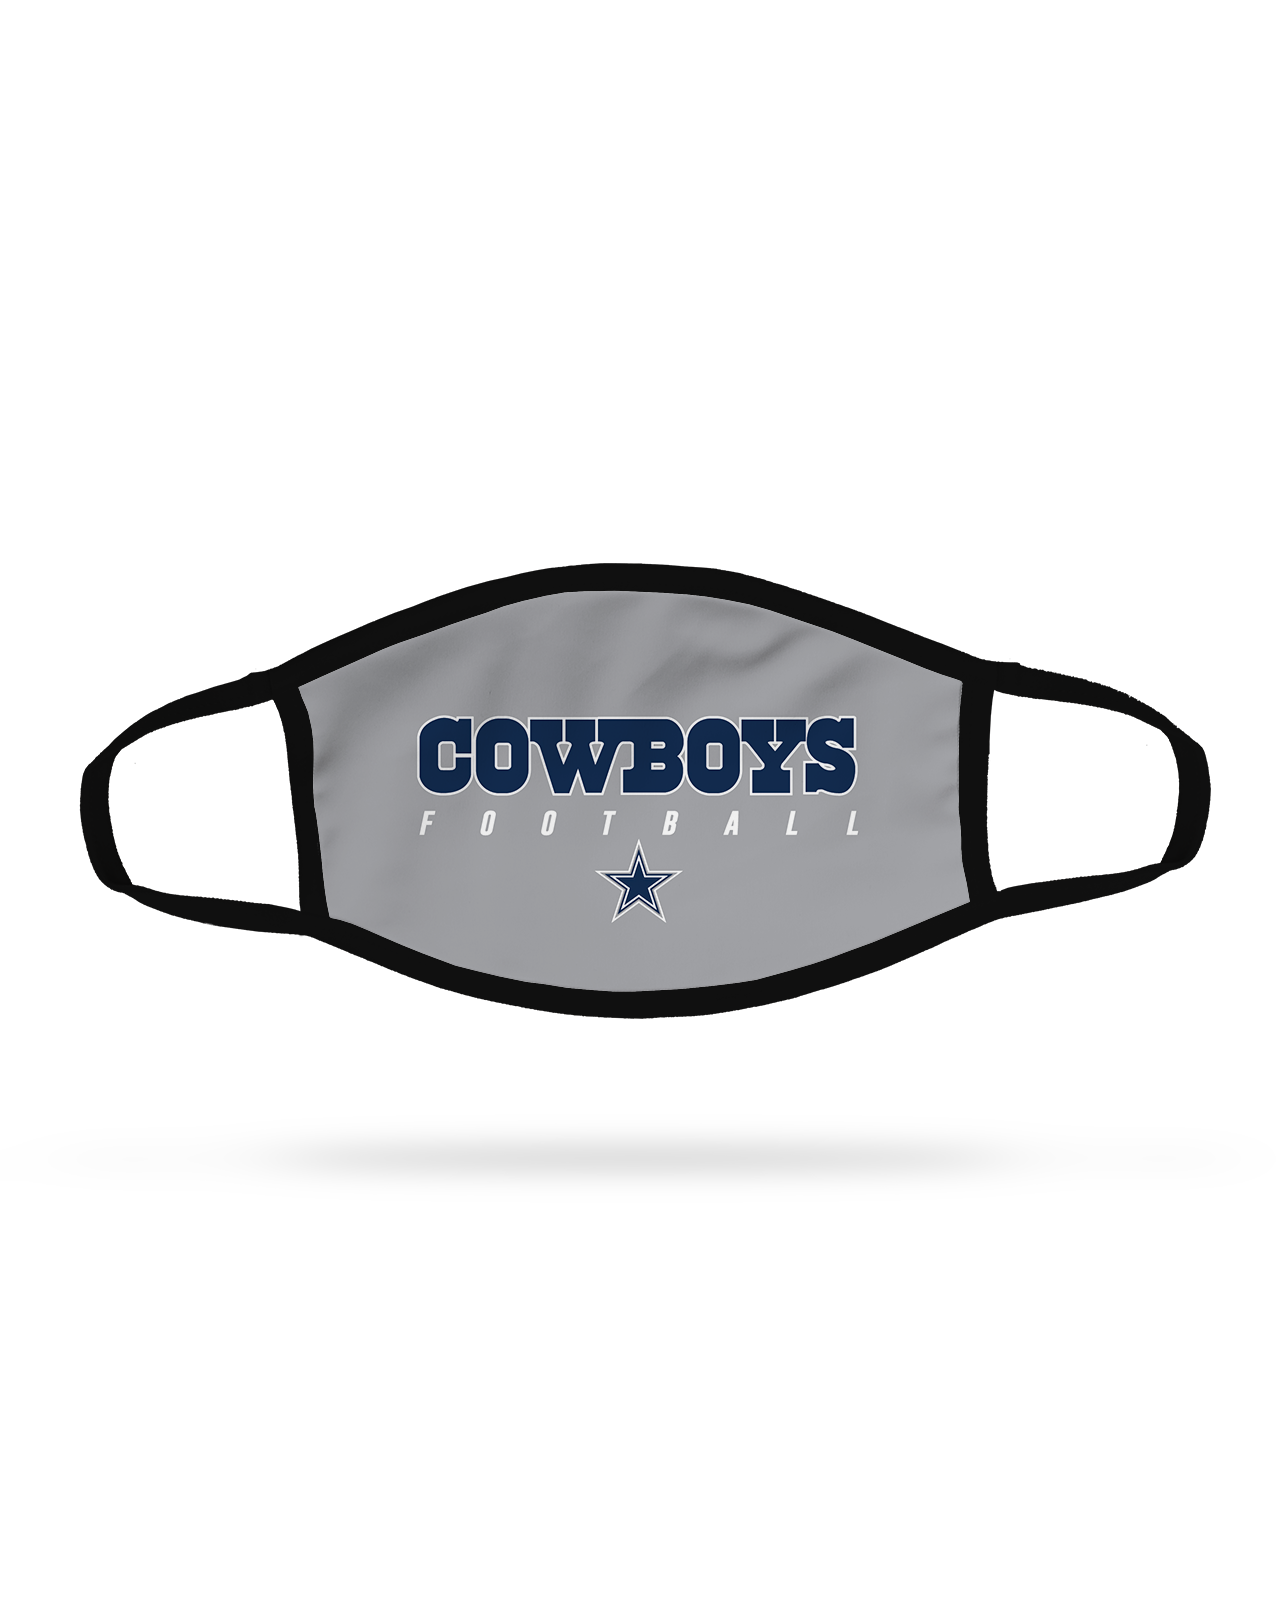 COWBOYS 2 Premium Face Mask COWBOYS 2 Premium Face Mask Printed all over in HD on premium fabric. Handmade in California.